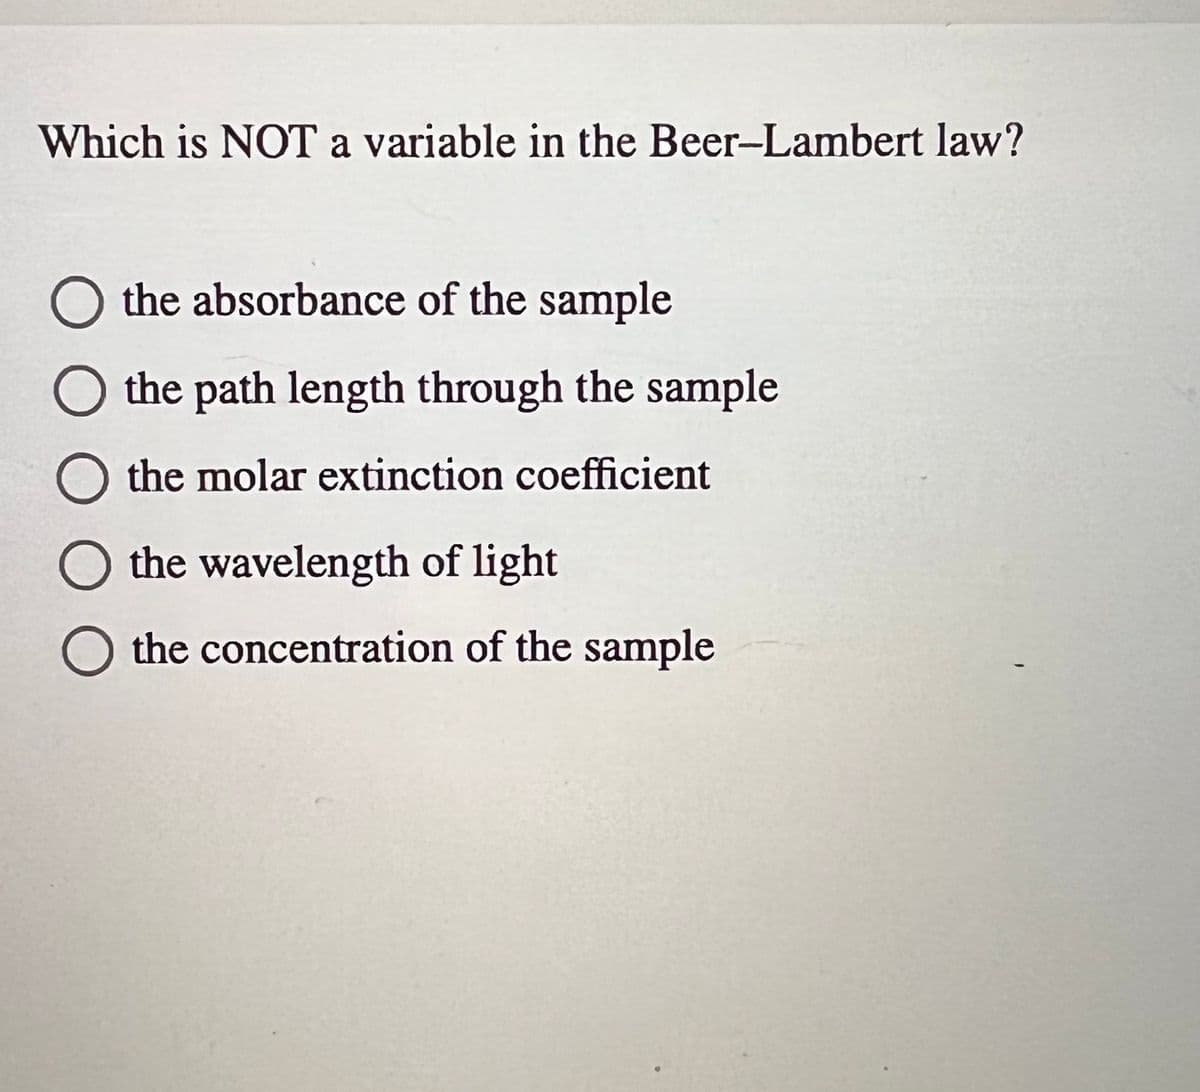 Which is NOT a variable in the Beer-Lambert law?
the absorbance of the sample
the path length through the sample
the molar extinction coefficient
the wavelength of light
the concentration of the sample